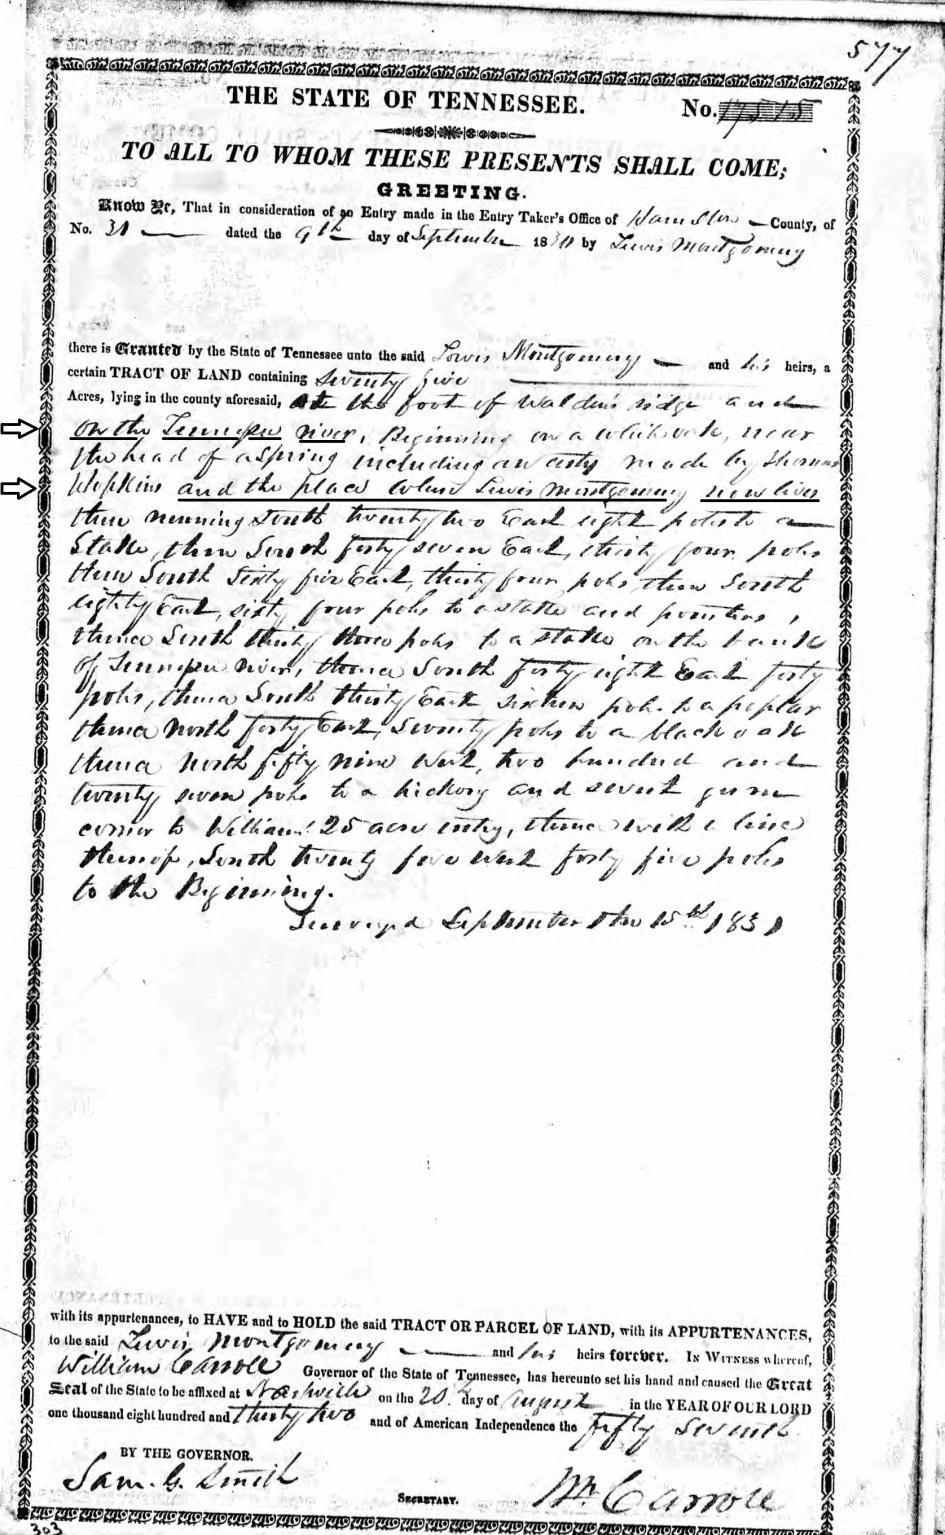 Returning now to Lewis Montgomery owning land on the Tennessee River, there are two deeds for him in Hamilton County, Tennessee in 1830-31.